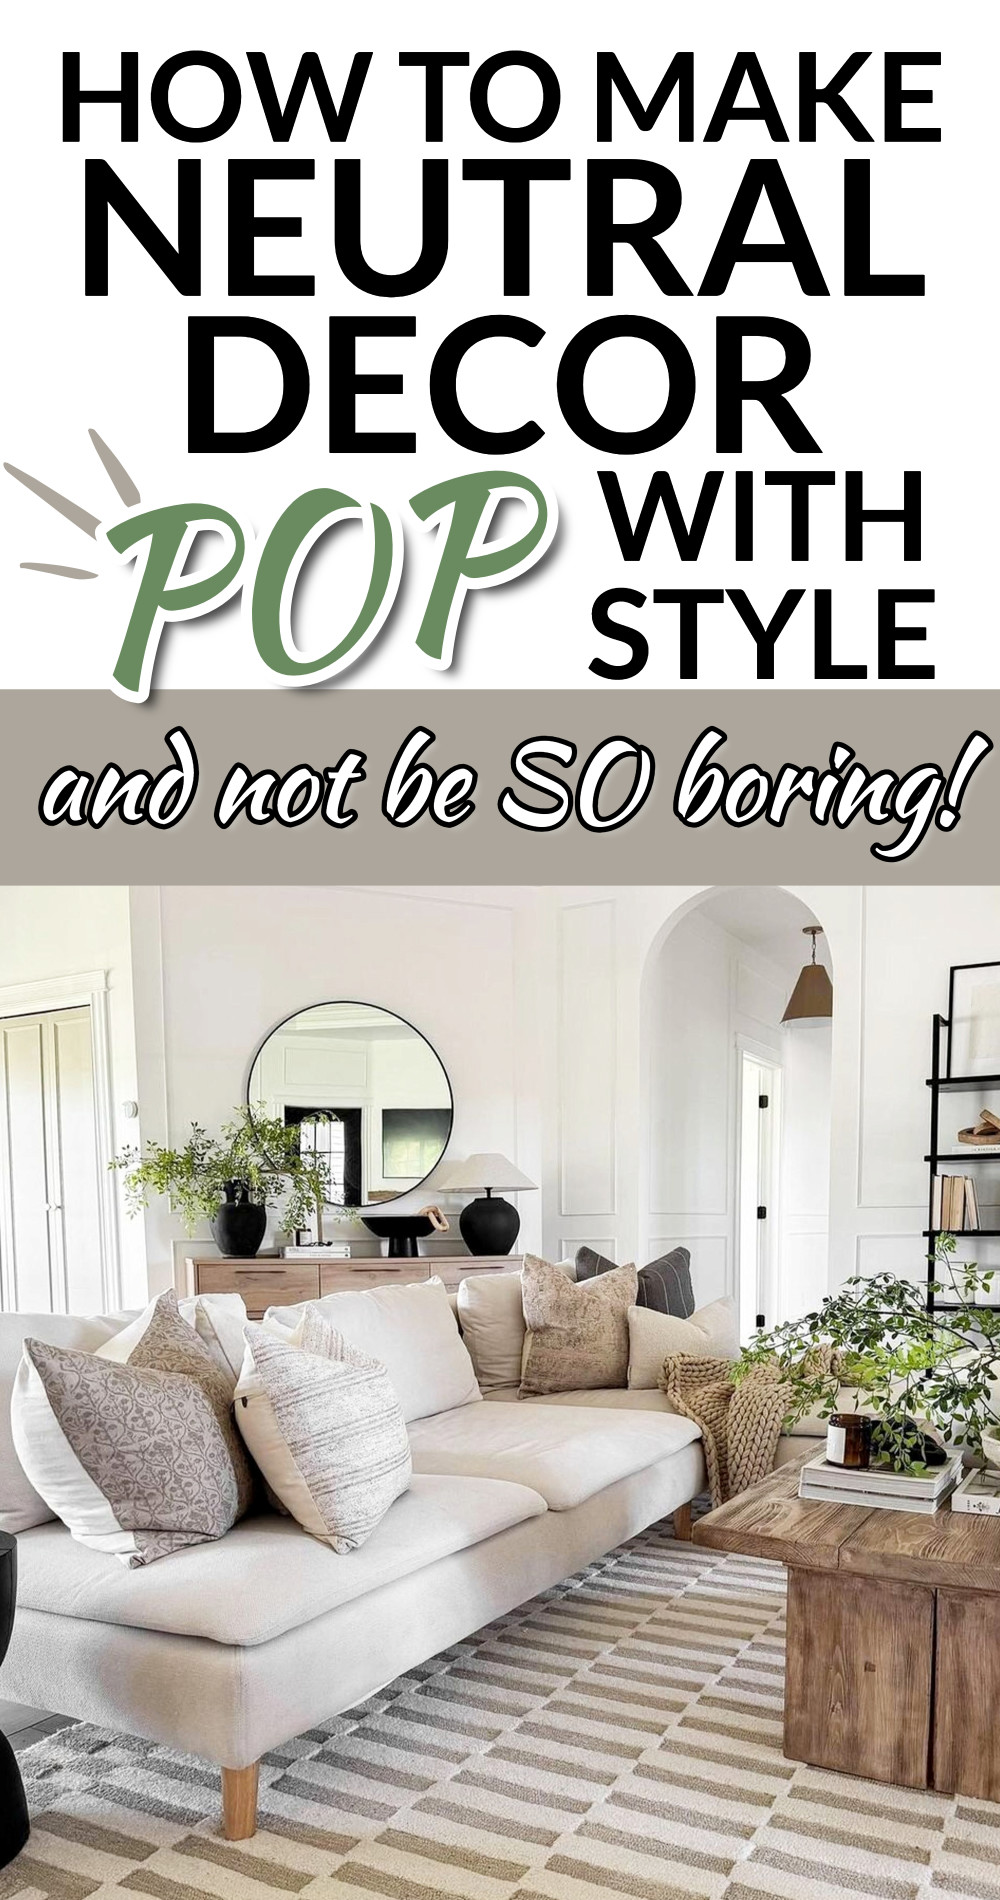 how to make neutral decor pop with style